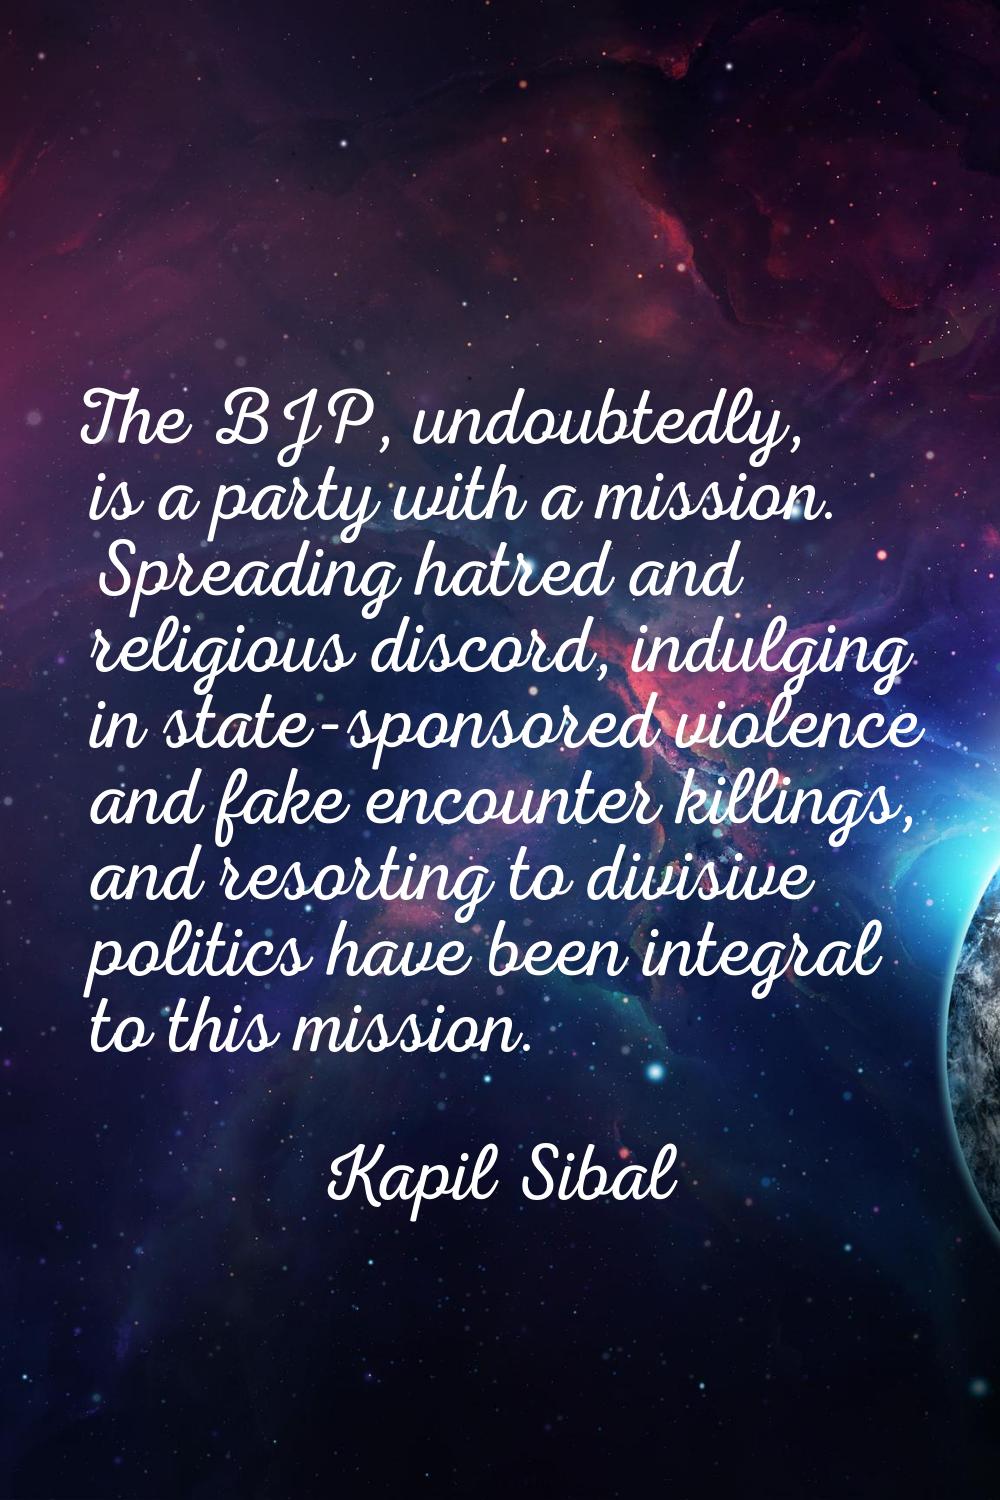 The BJP, undoubtedly, is a party with a mission. Spreading hatred and religious discord, indulging 